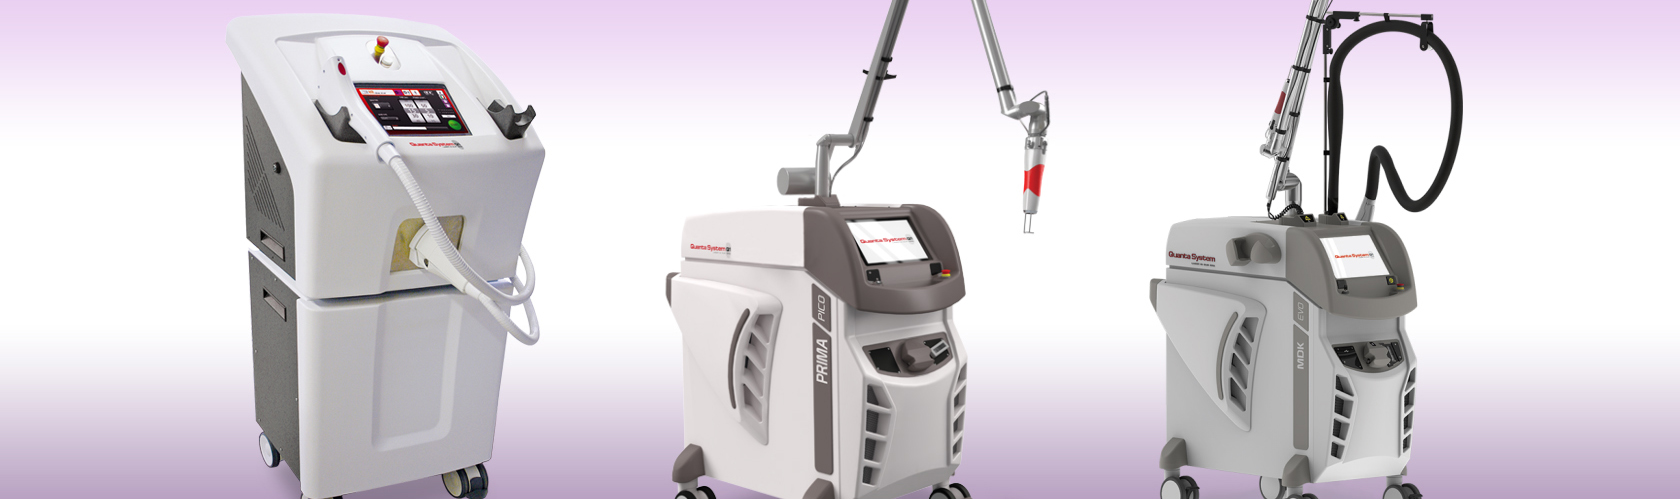 Used Lasers For Sale - Used Medical, Aesthetic, & Cosmetic Lasers